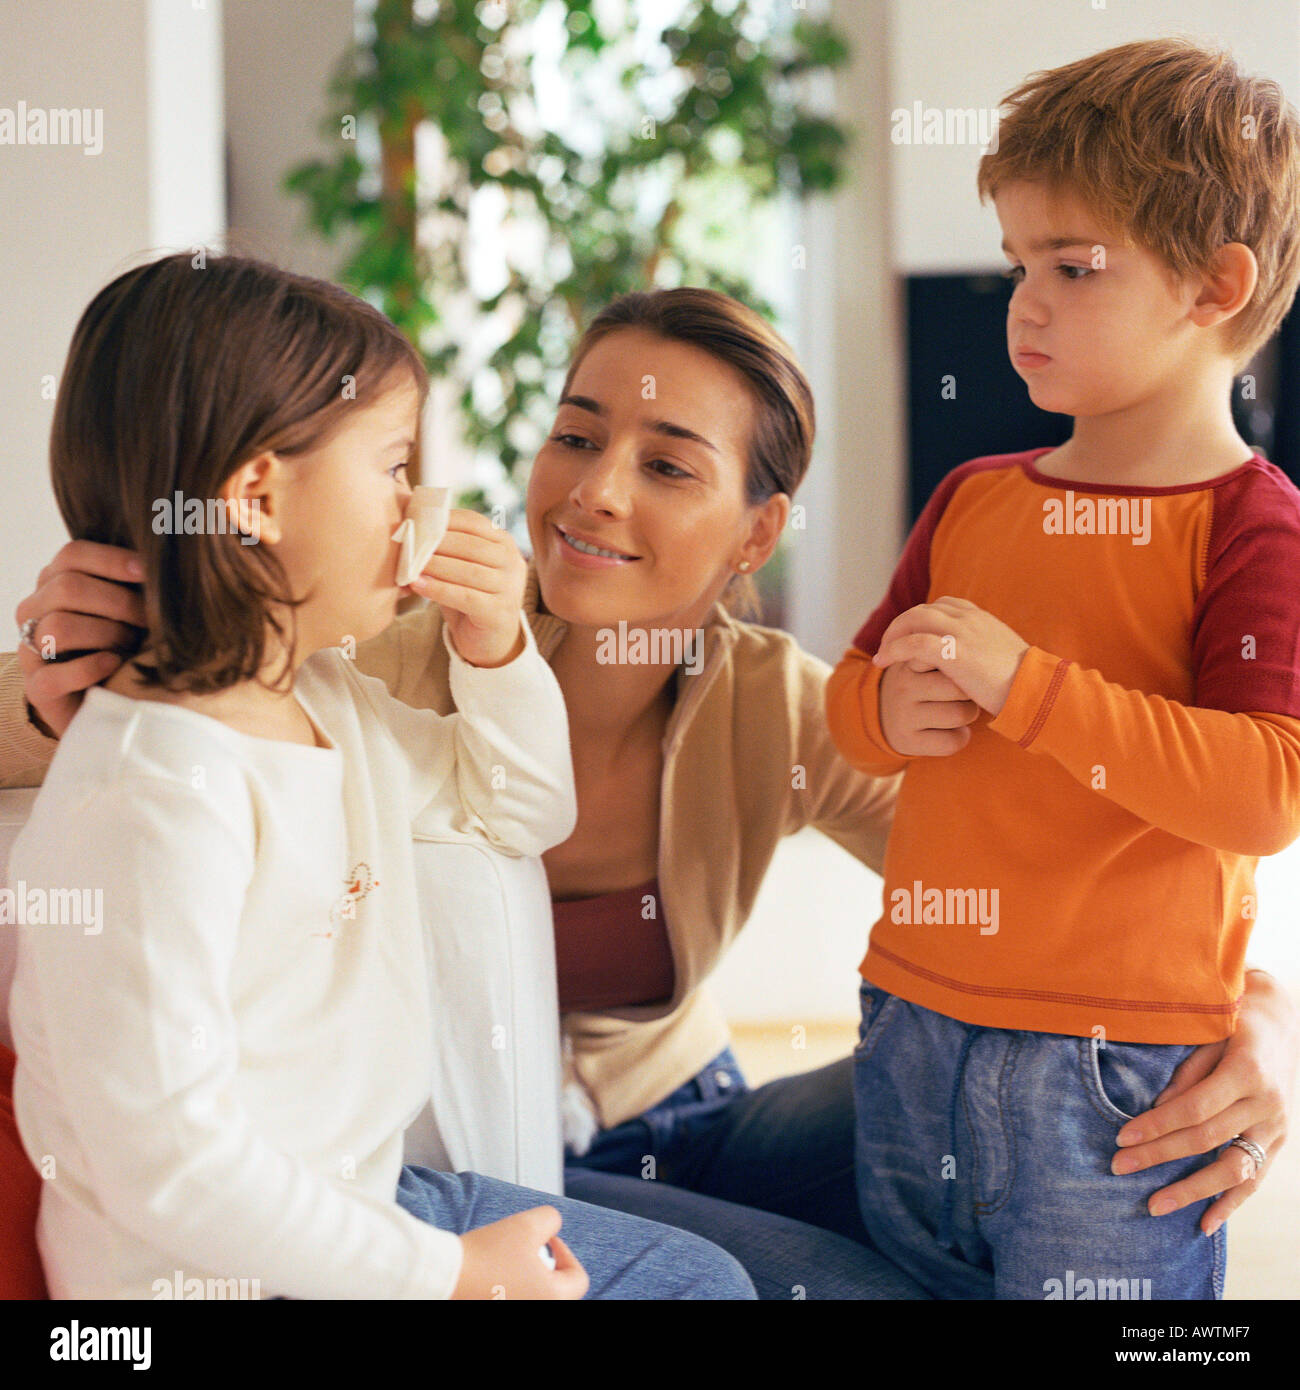 Woman with arms around two children, looking at girl blowing nose Stock Photo